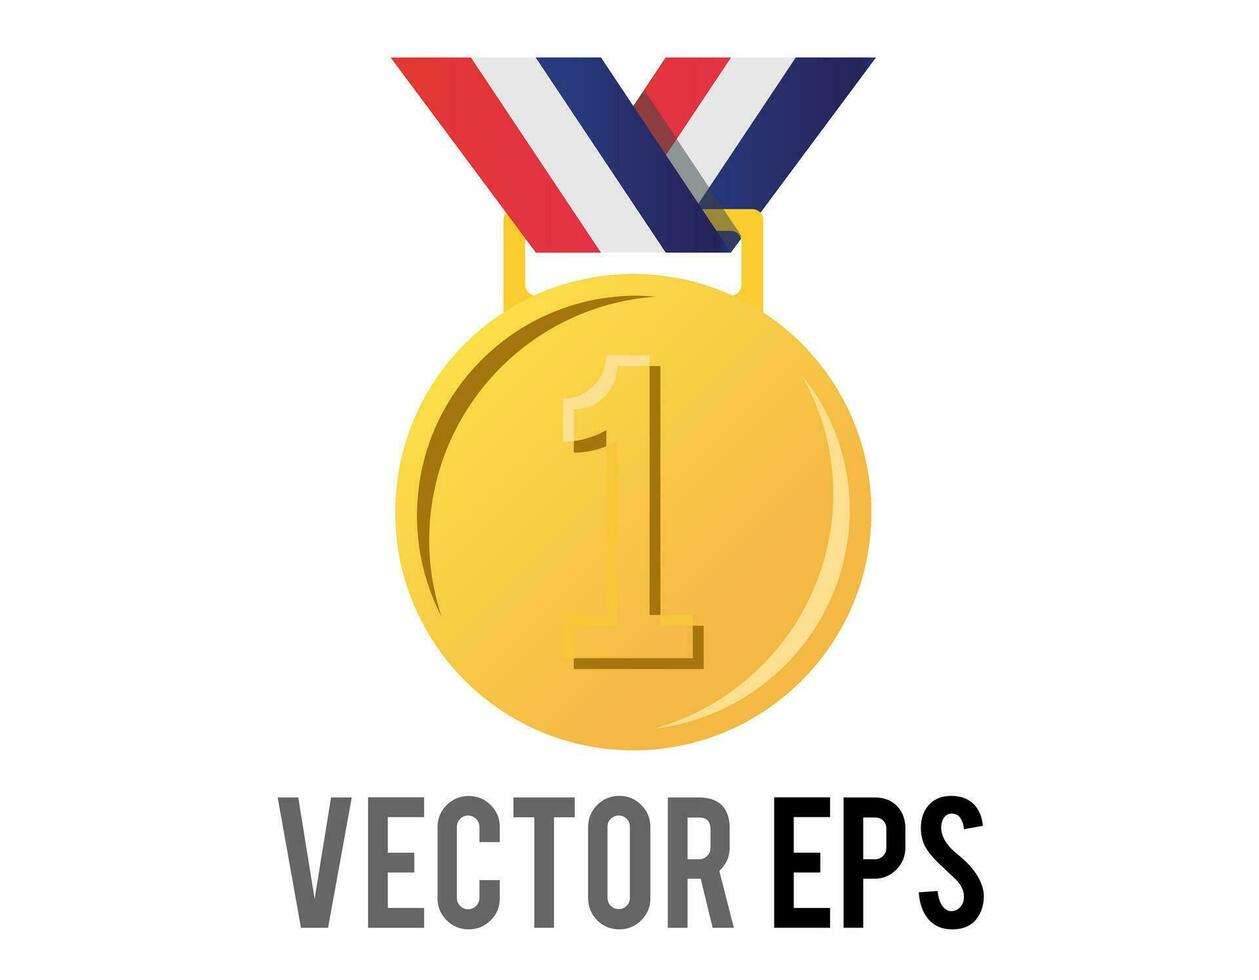 Vector first place gold sports medal icon with star, blue, white, red ribbon